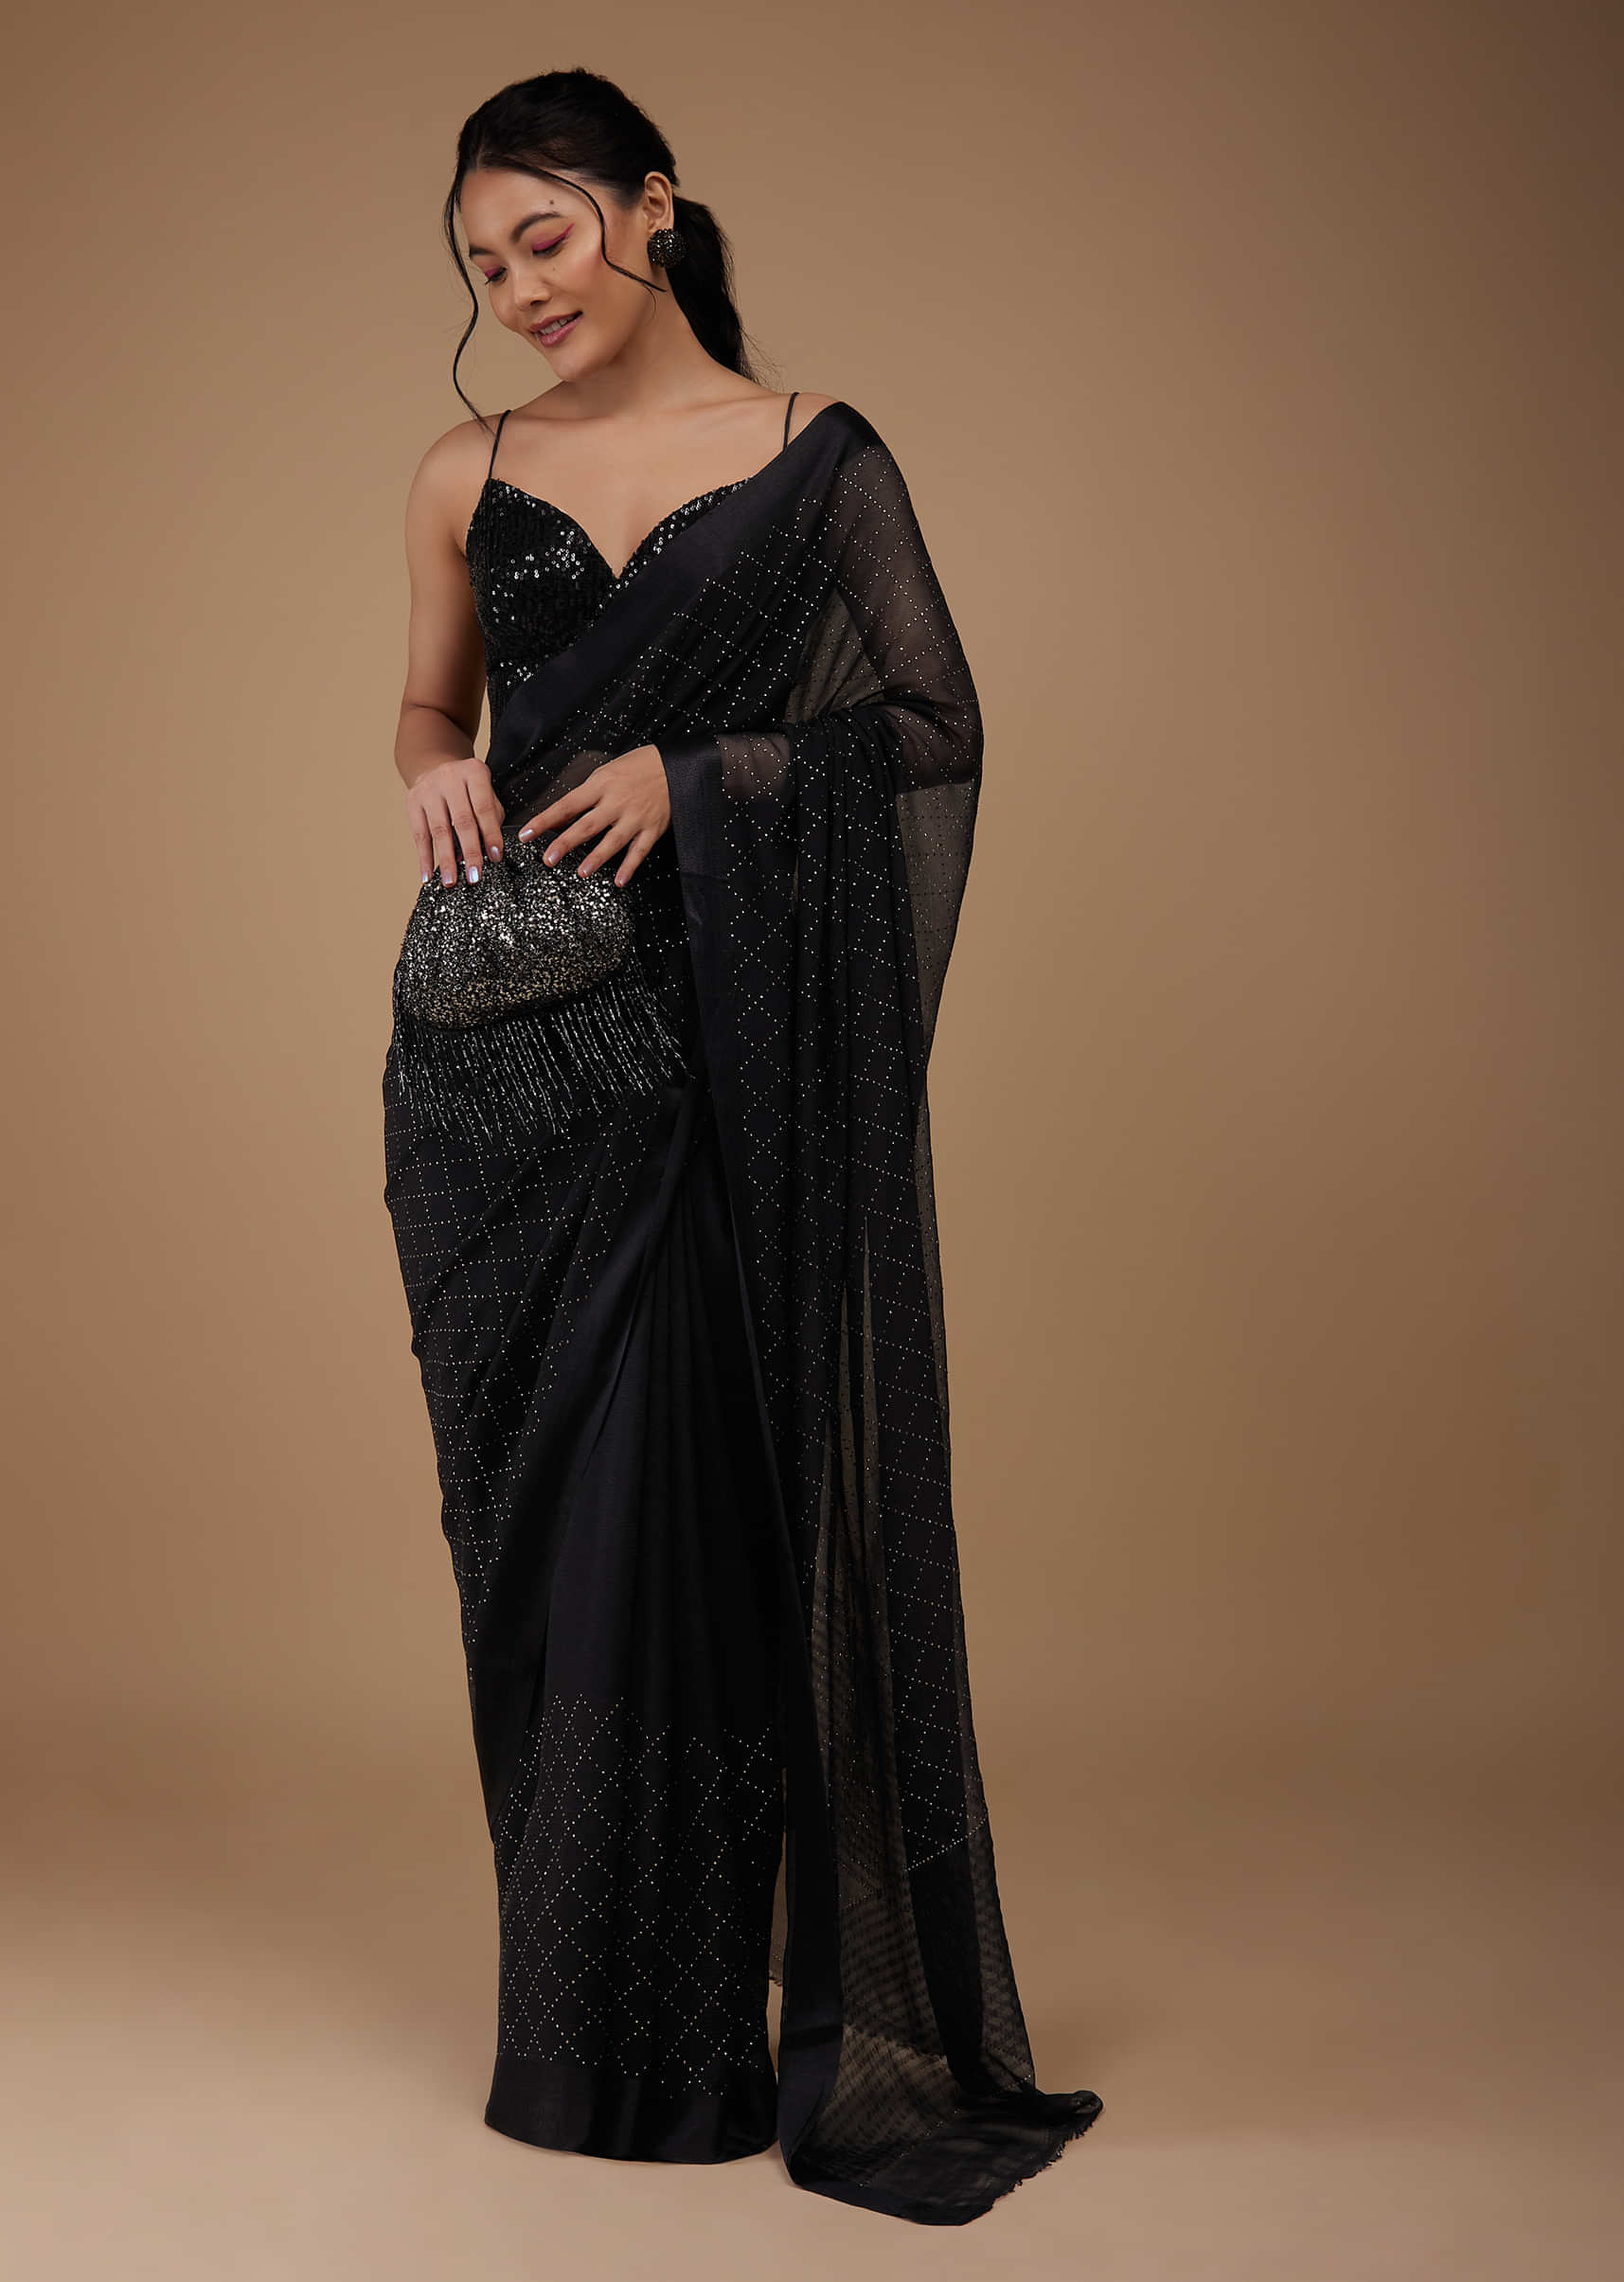 20 Trendy Collection of Black Sarees For Stylish Women